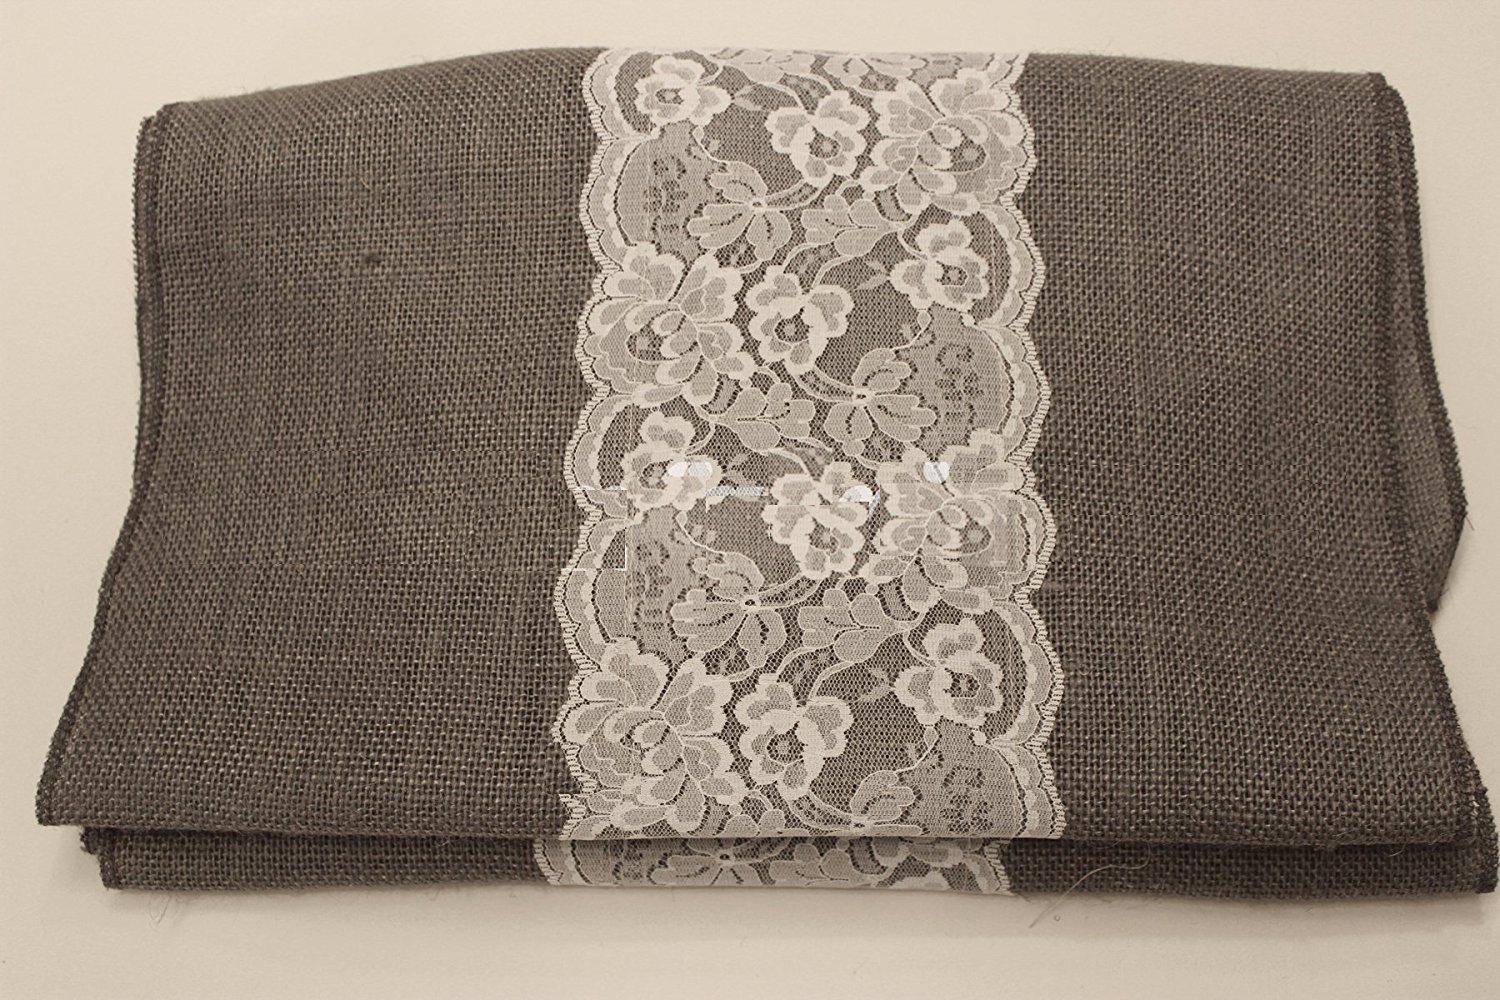 14" Charcoal Grey Burlap Runner with 6" White Lace